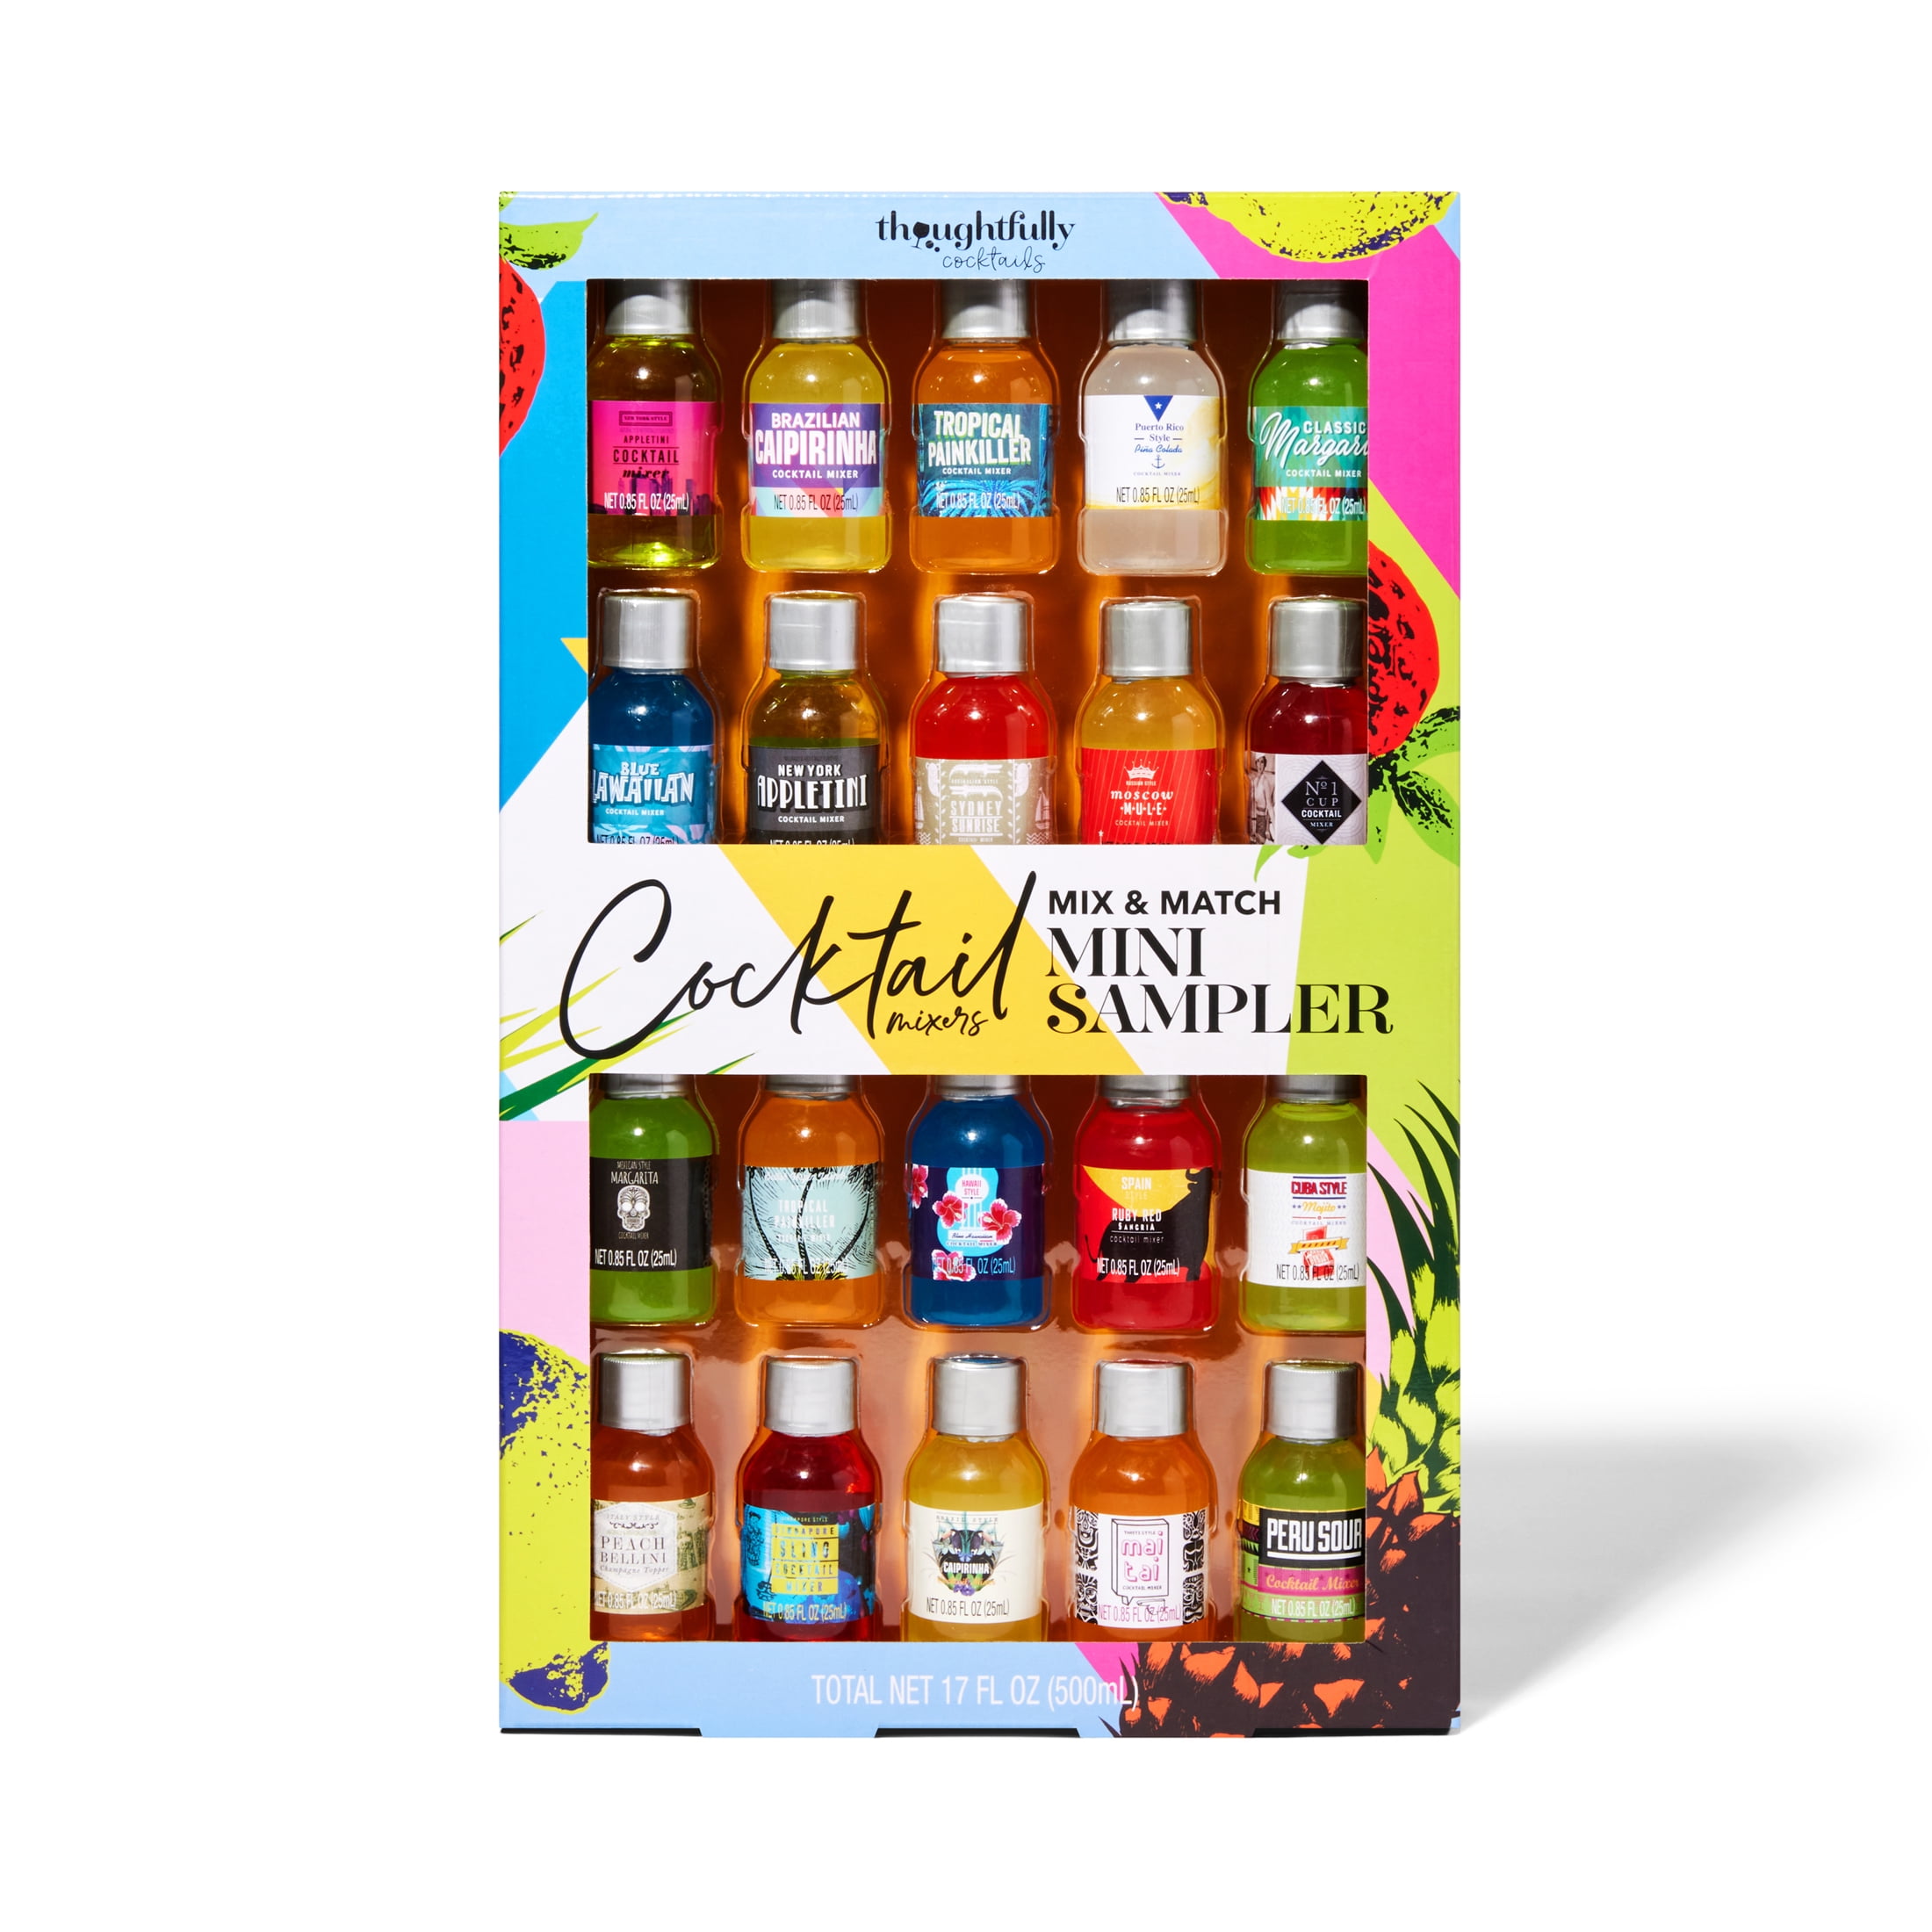 Craftmix Variety Pack Cocktail Mixers, 4 Flavors, 12 Count